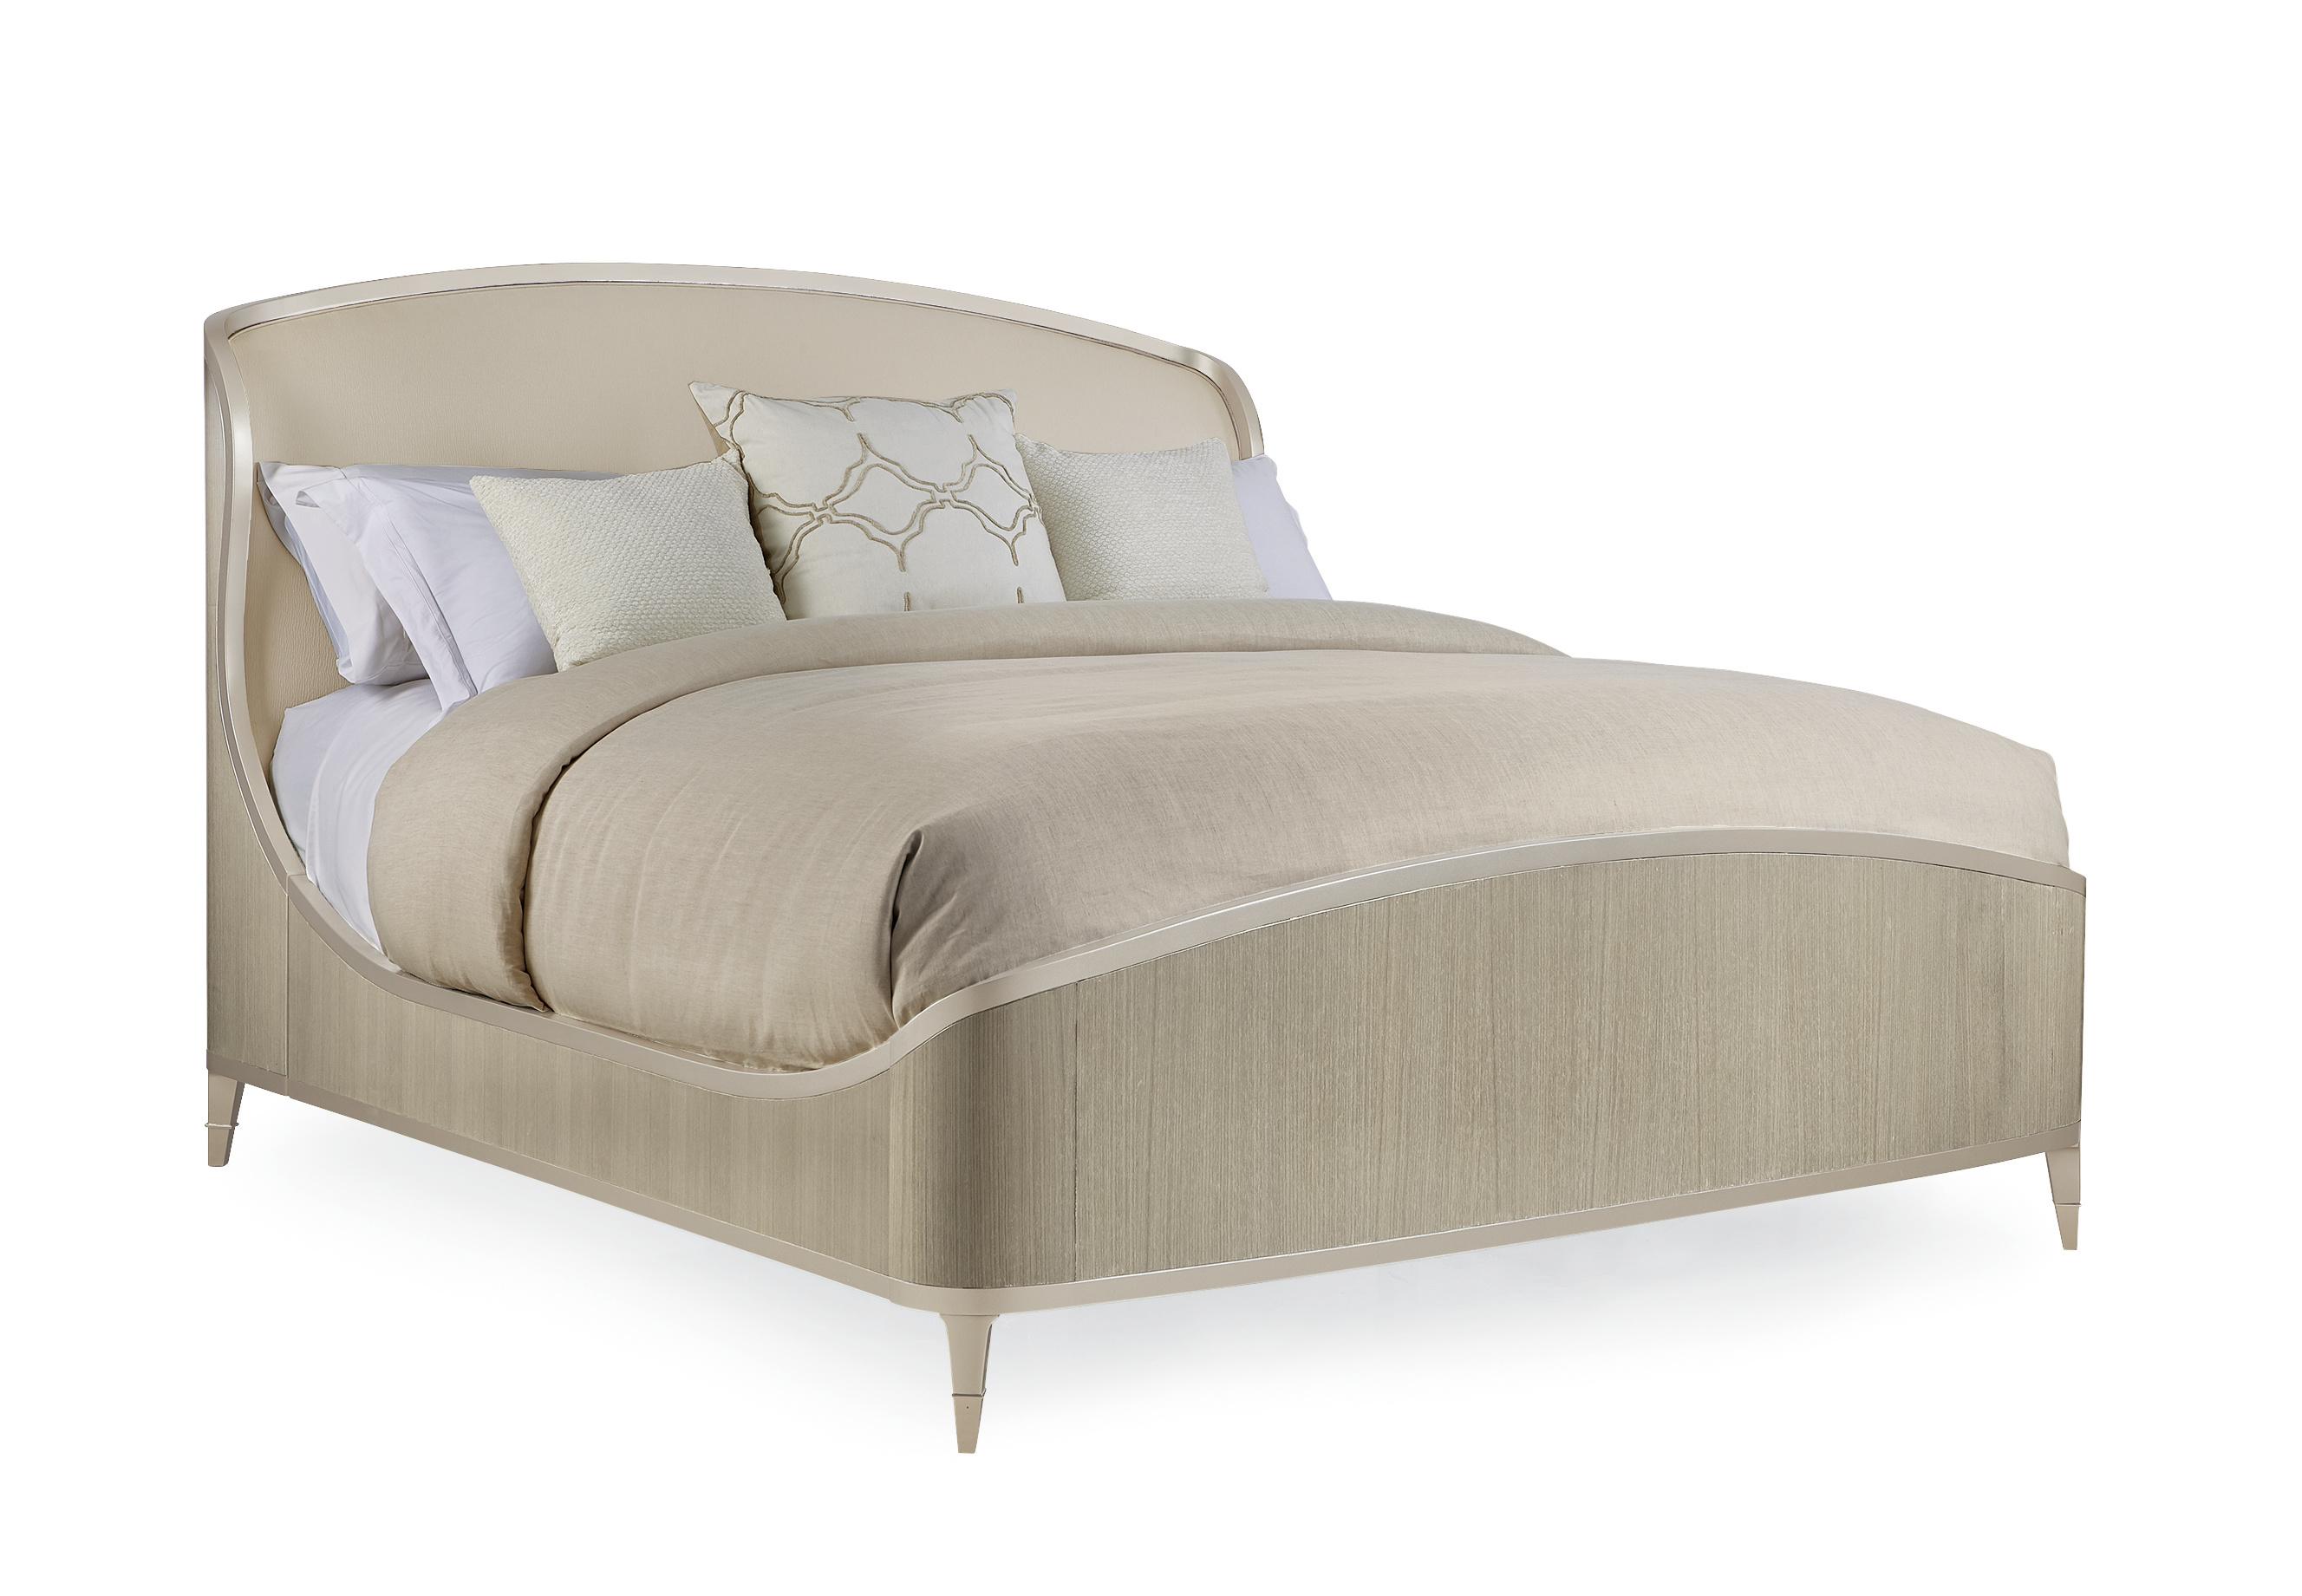 Contemporary Platform Bed Good Nights Sleep CLA-417-126 in Champagne Fabric